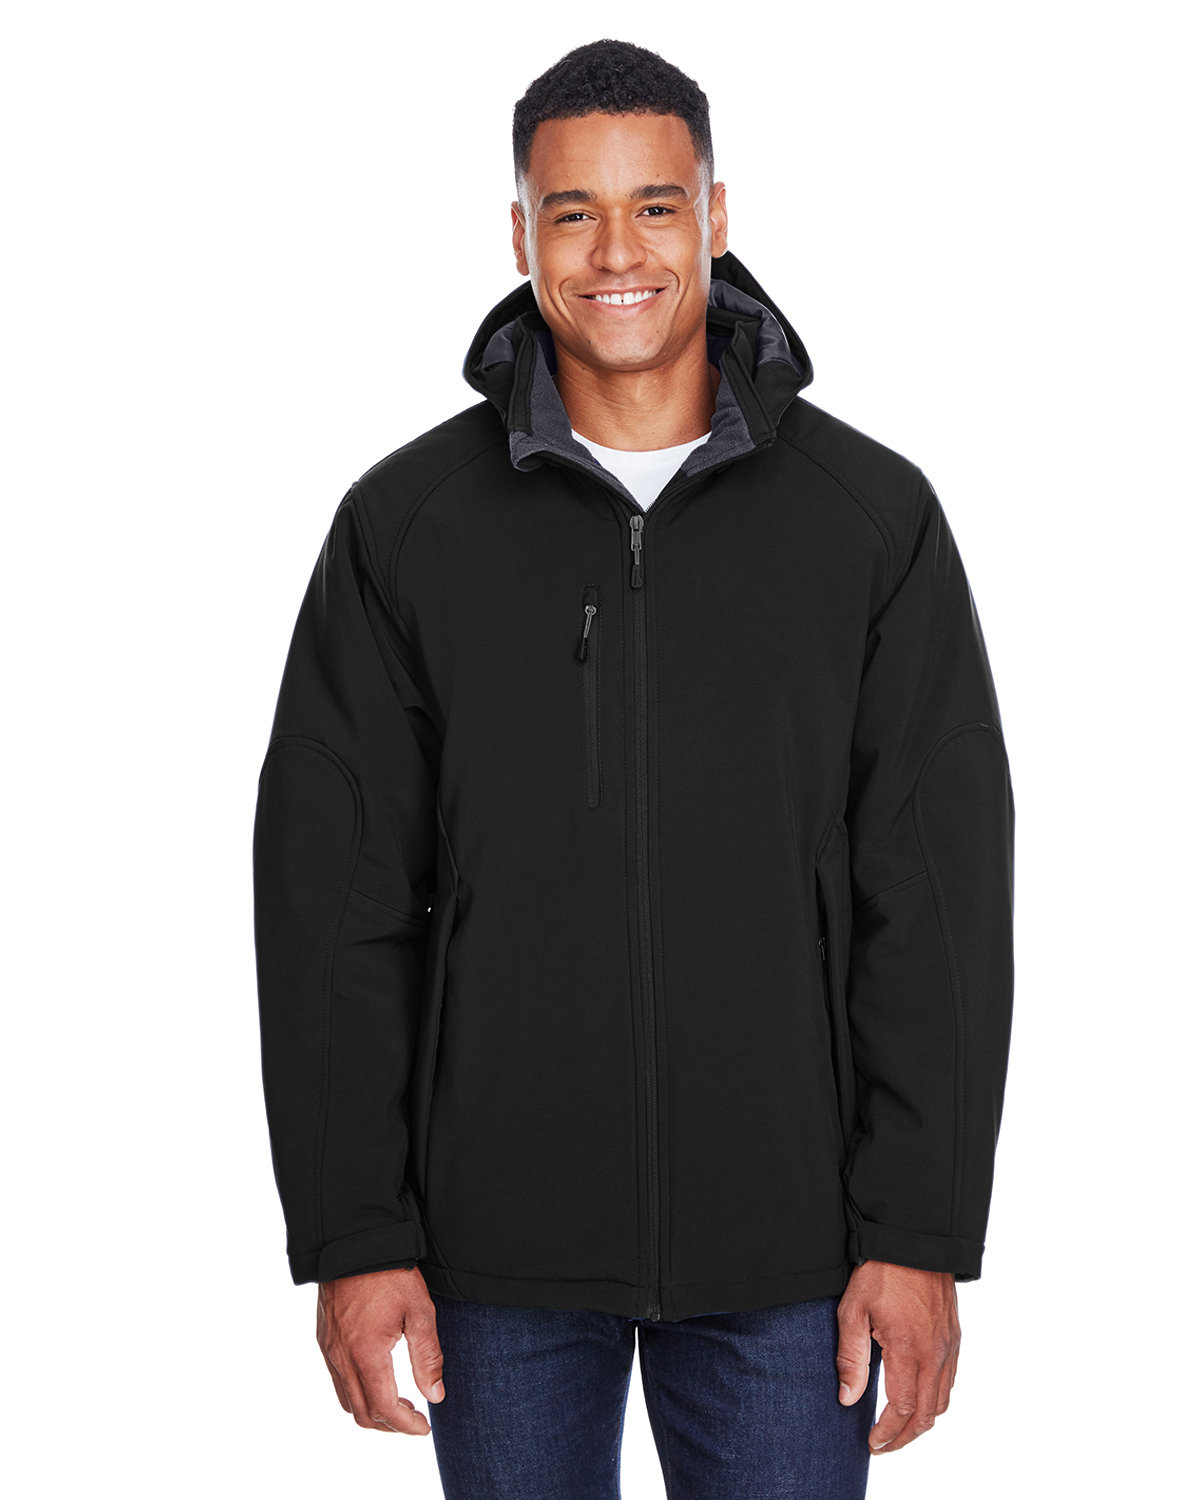 North End 88159 - Men's Glacier Insulated Three-Layer Fleece Bonded Soft Shell Jacket with Detachable Hood